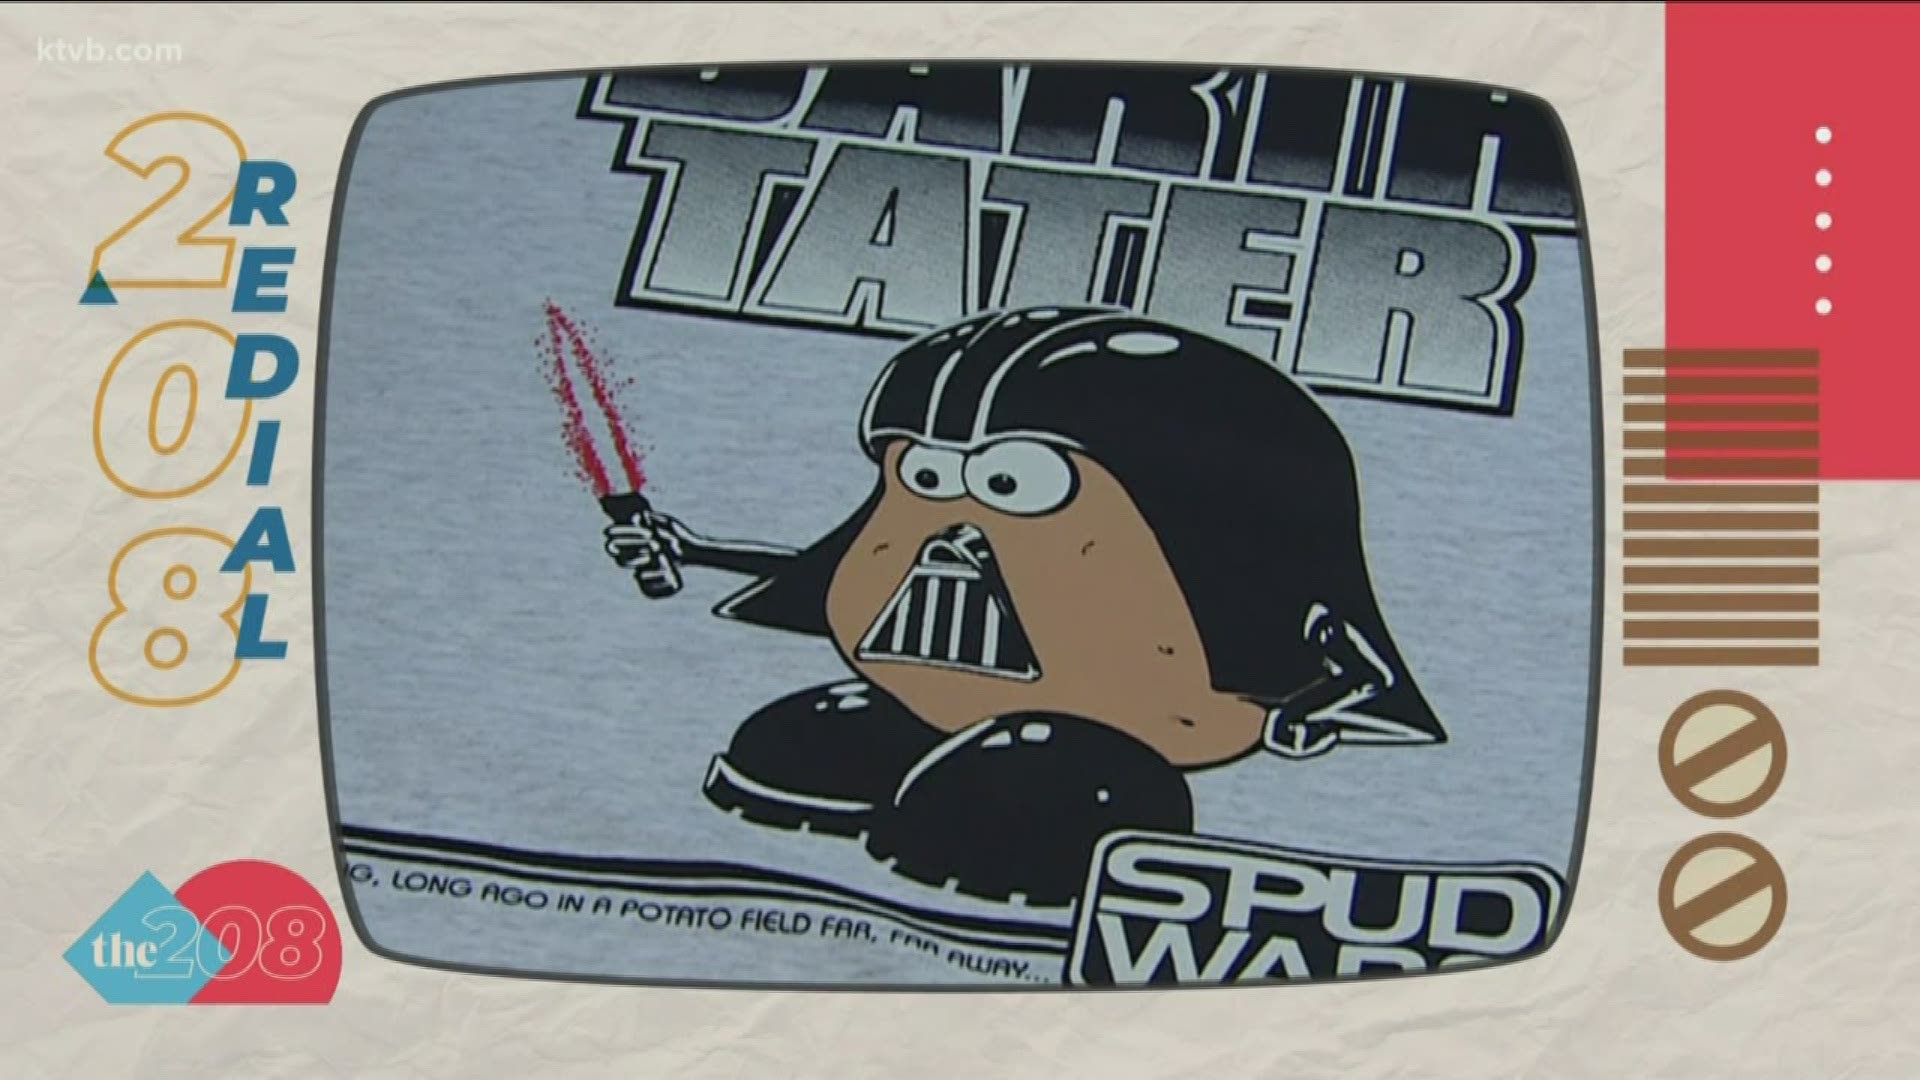 "As we say on our t-shirt design, long, long ago in a potato field far far away that's where Darth tater came from."